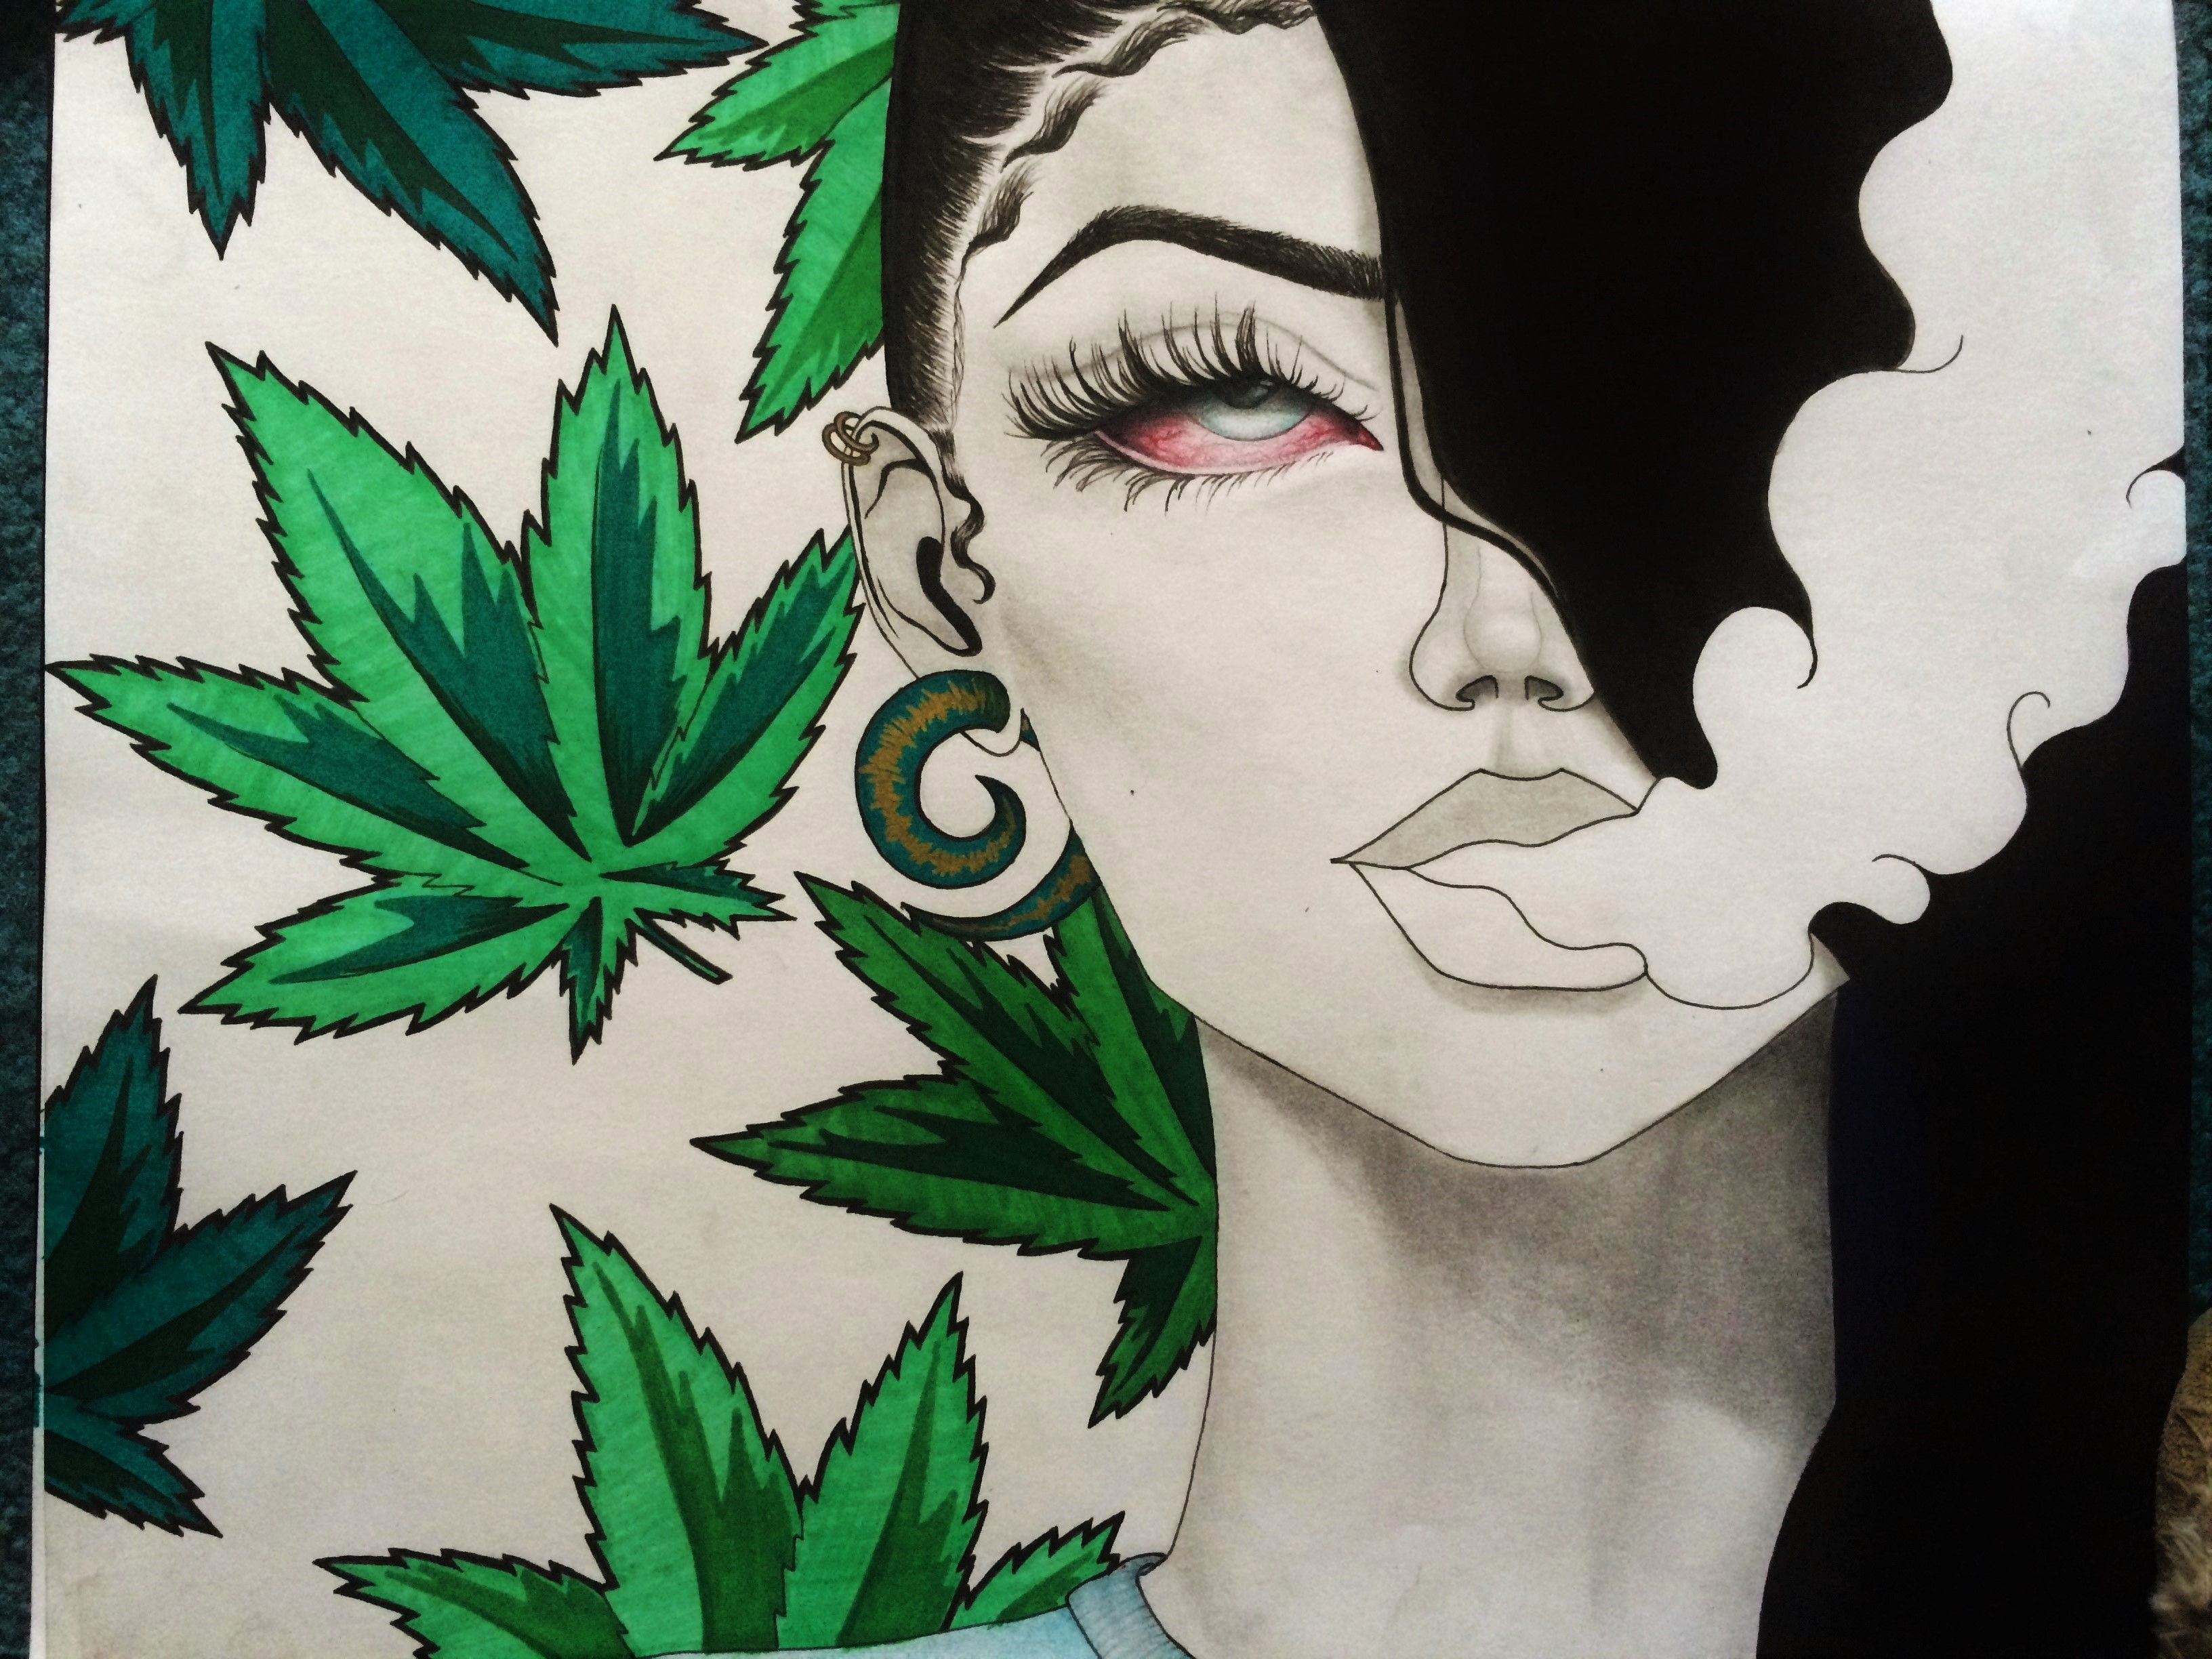 Download Drawings Of Girls Smoking Weed On Itl.cat. 